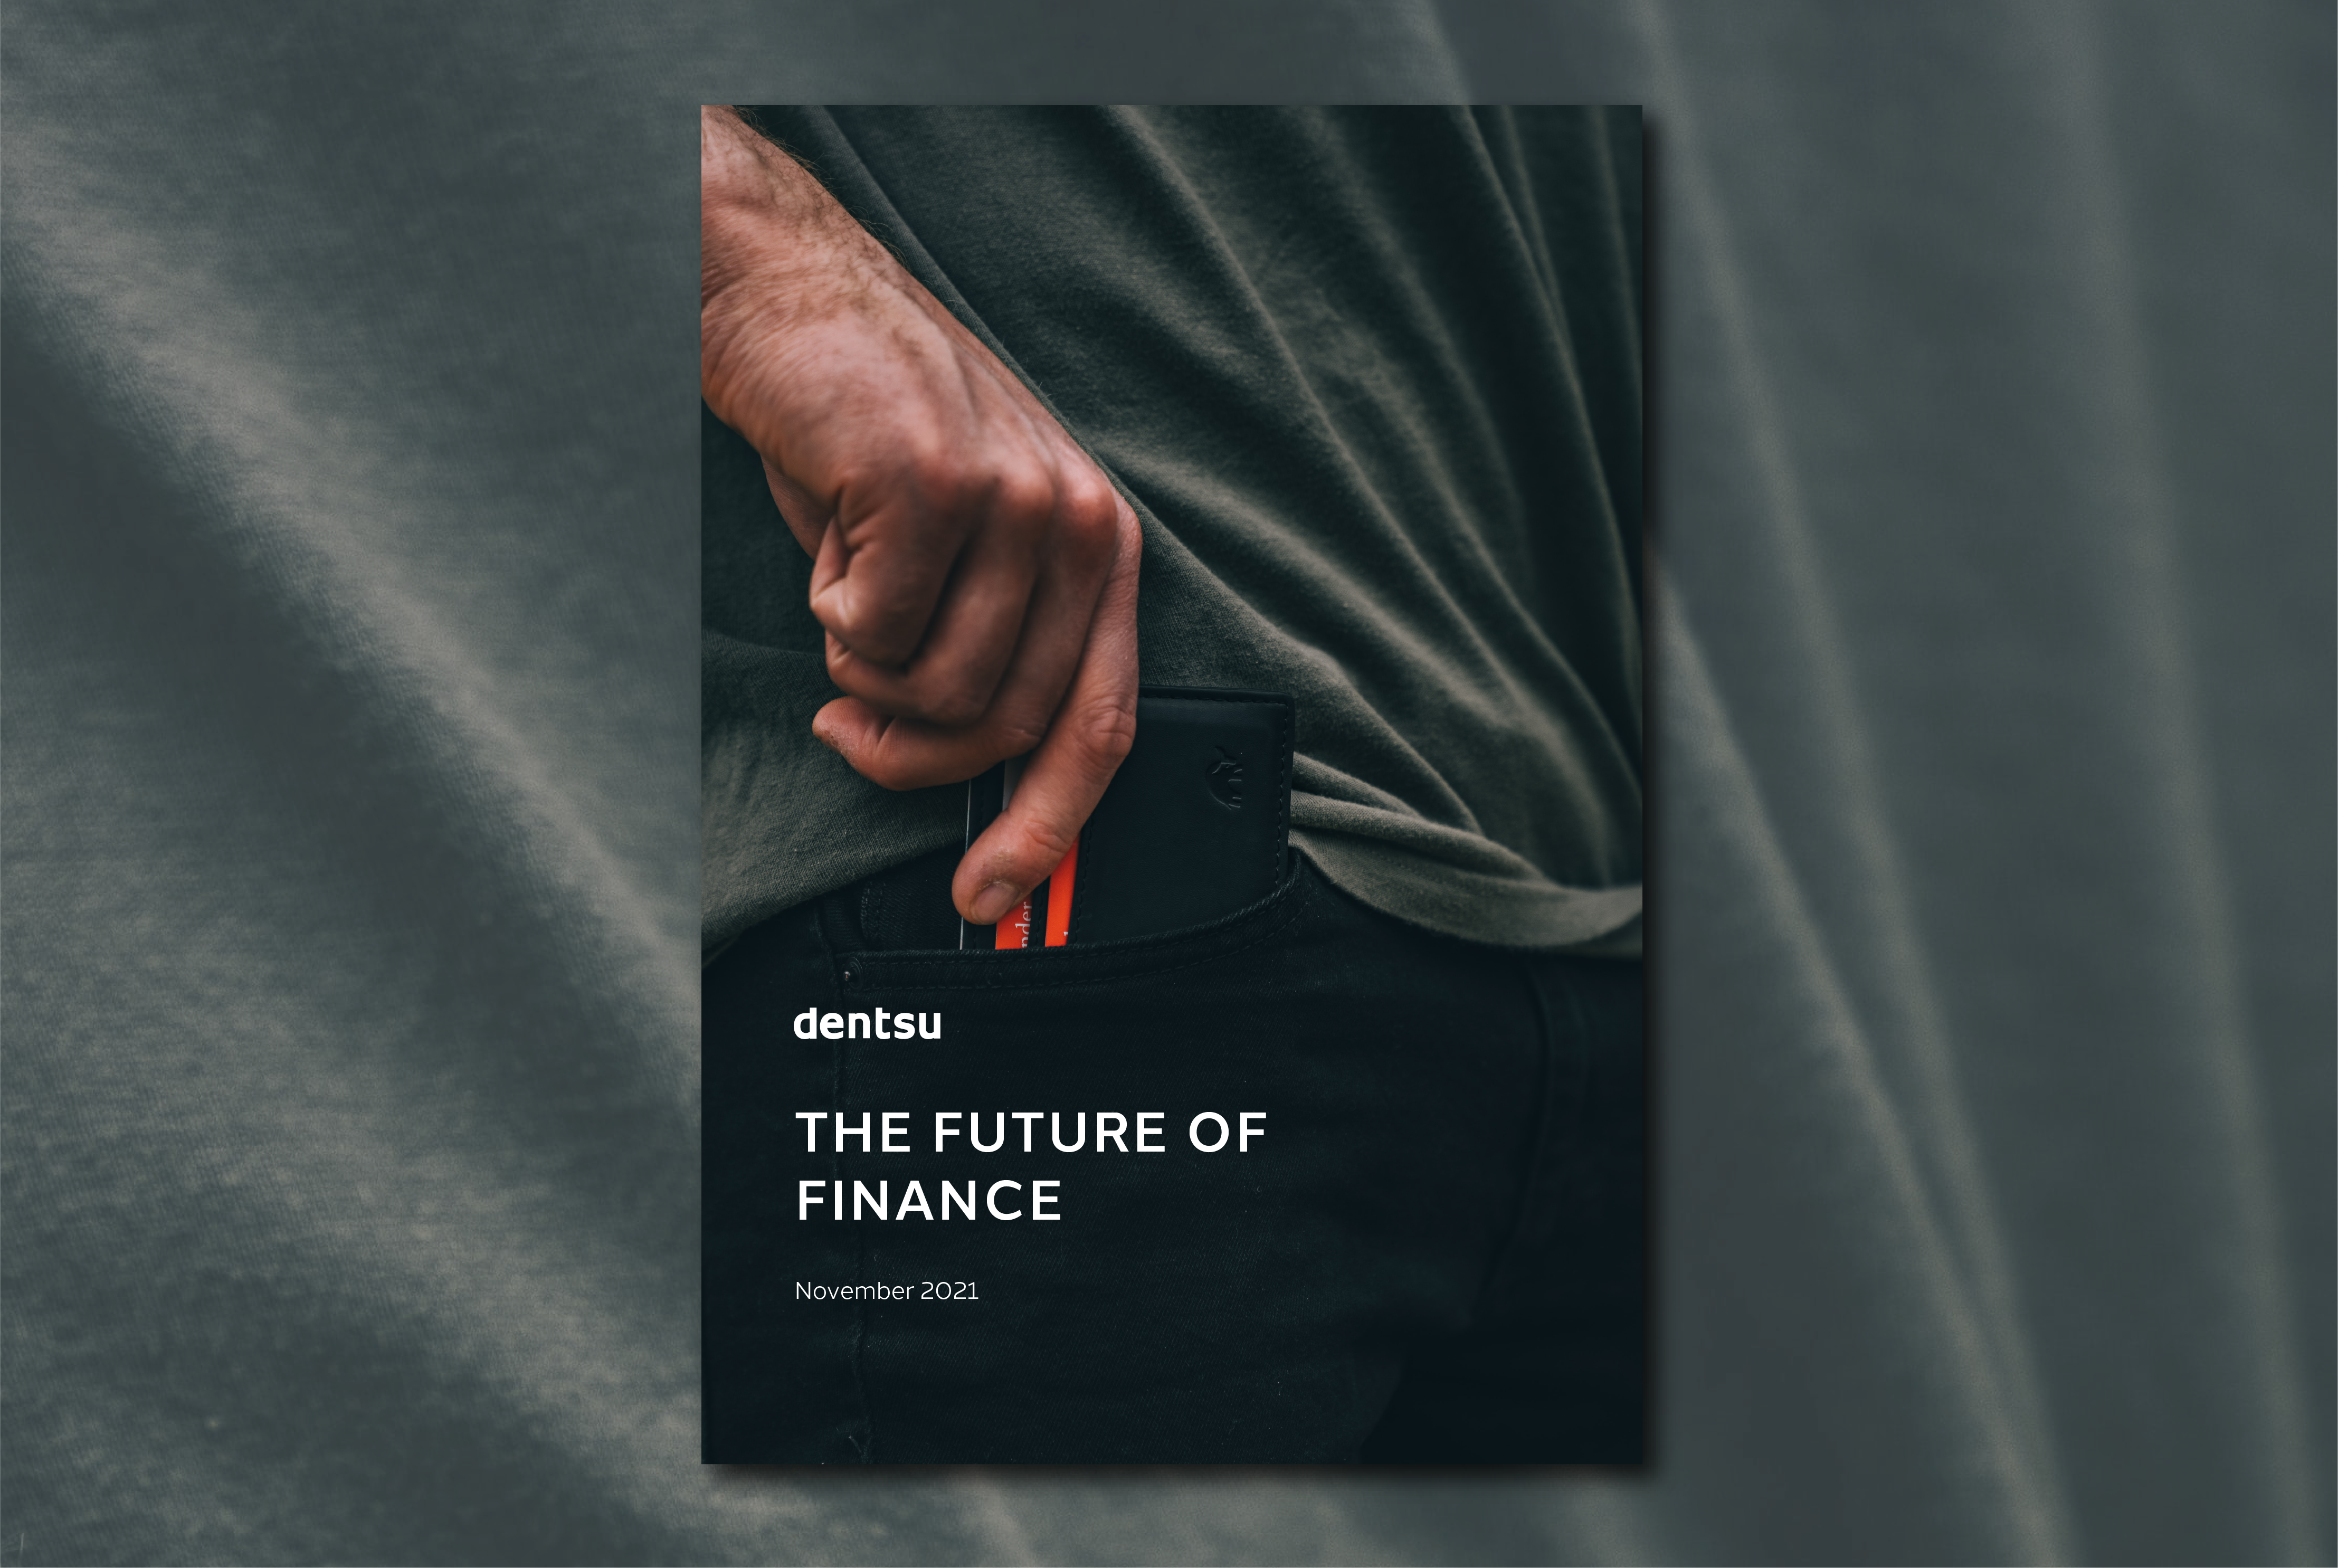 The Future of Finance - from Dentsu Intelligence